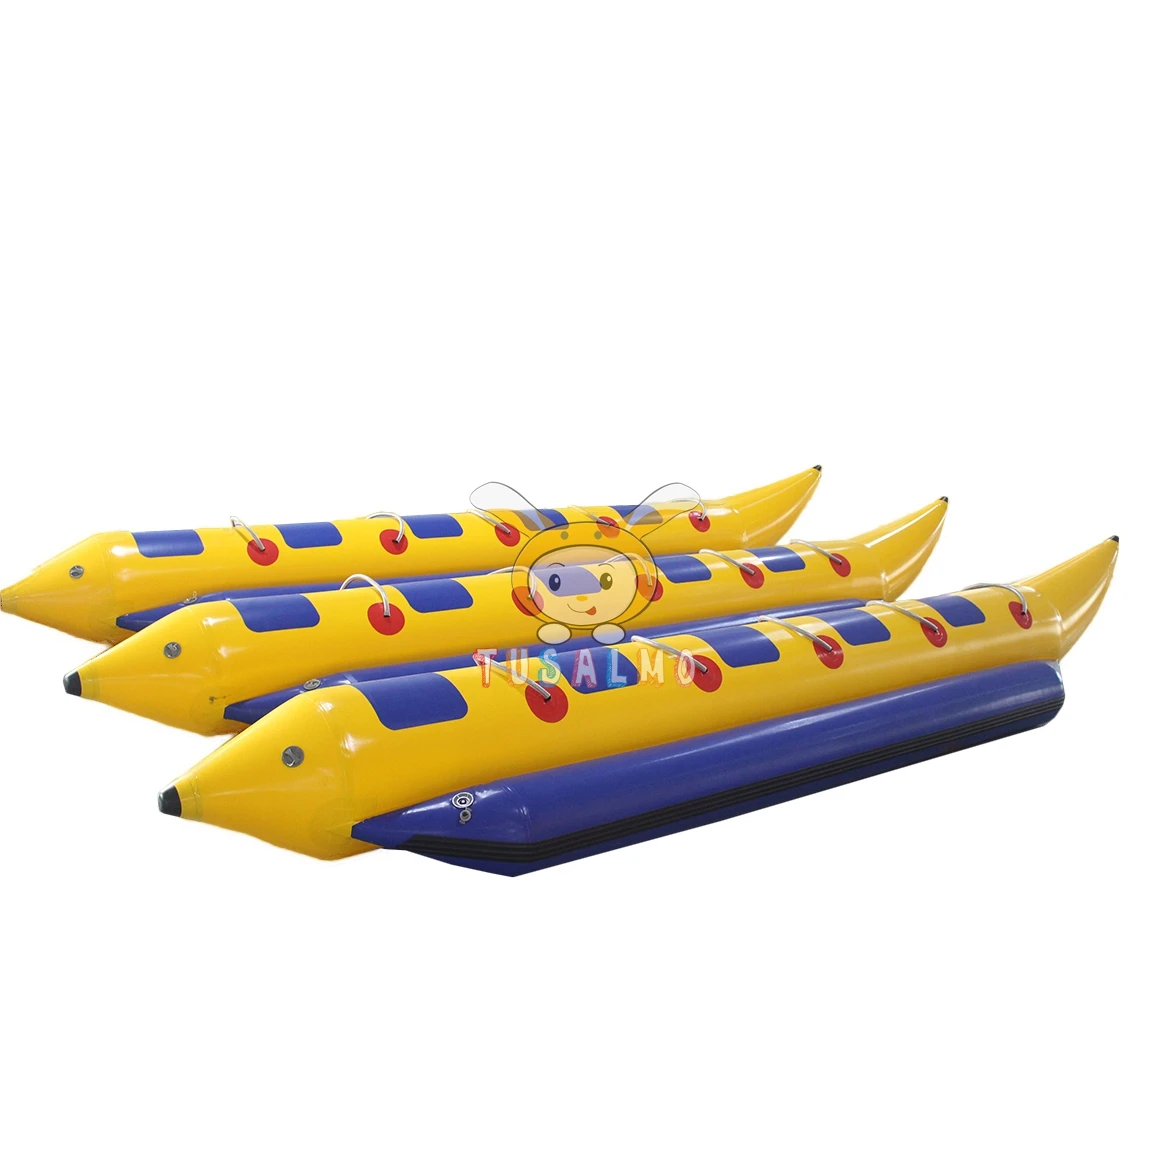 

Nathaniel 5 Persons Inflatable Flying Towable Funny Inflatable Water Banana Boat for Aqua Park Games